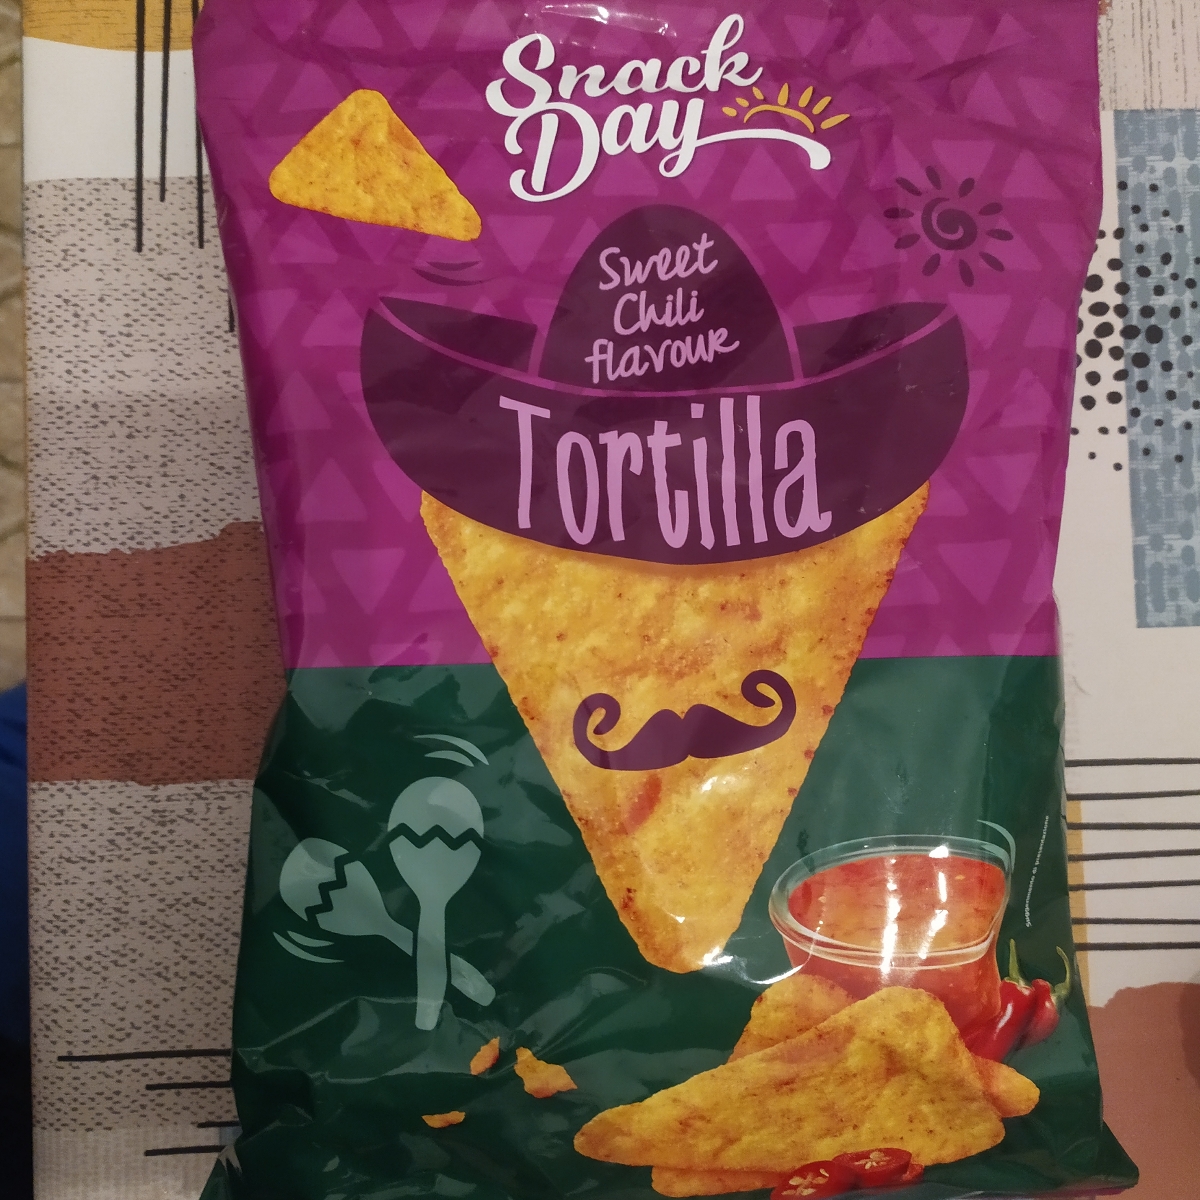 Snack Day Tortilla chips - barbeque Review | abillion